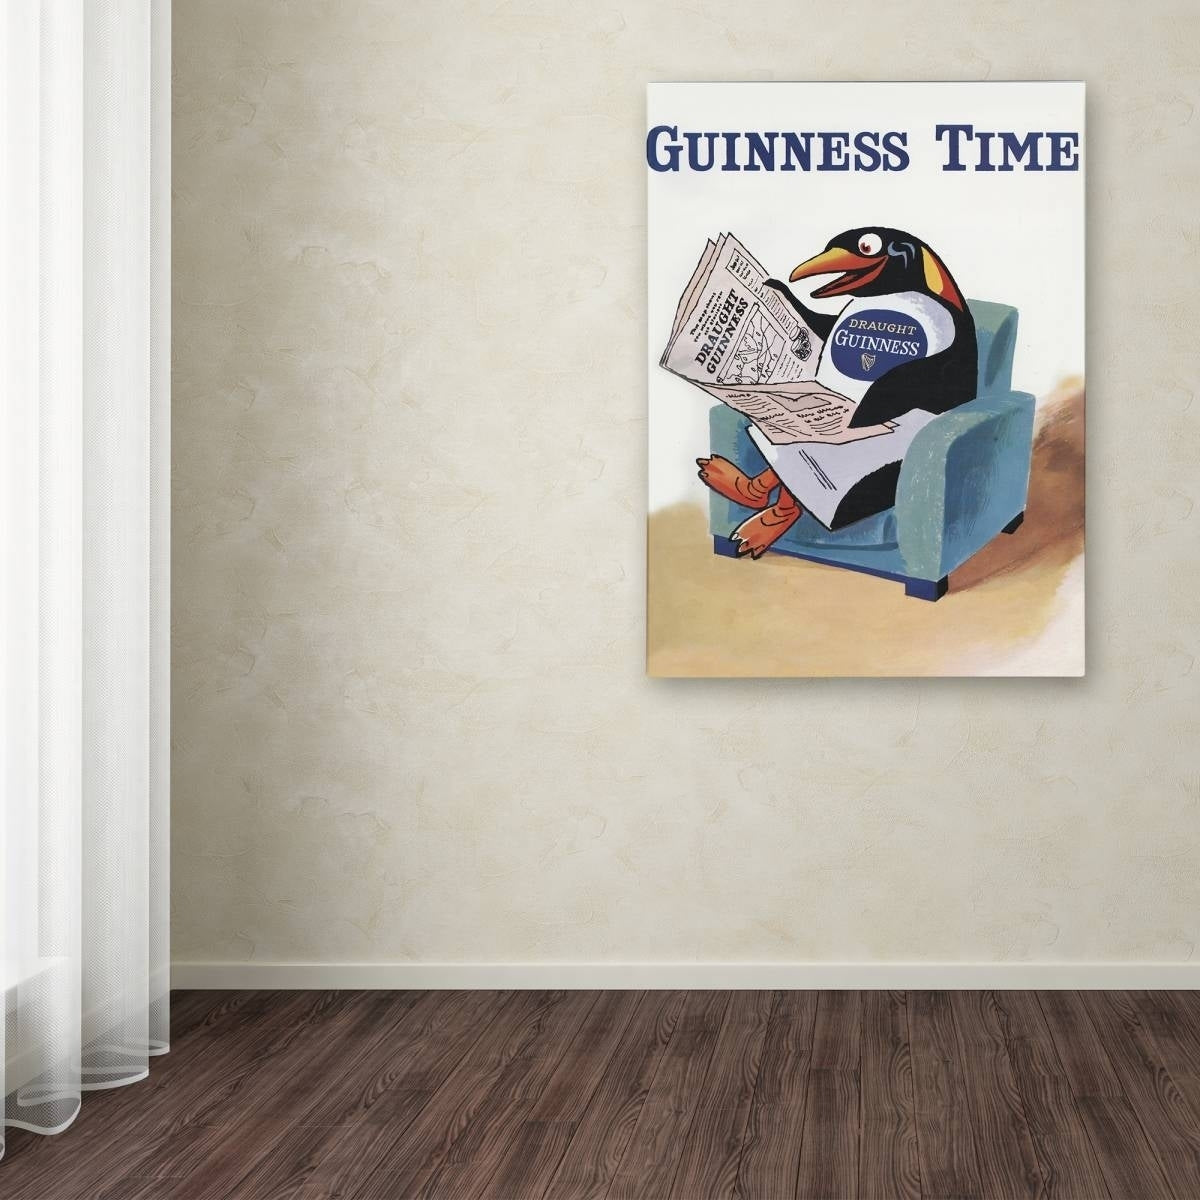 Guinness Brewery 'Guinness Time II' canvas art print on canvas.